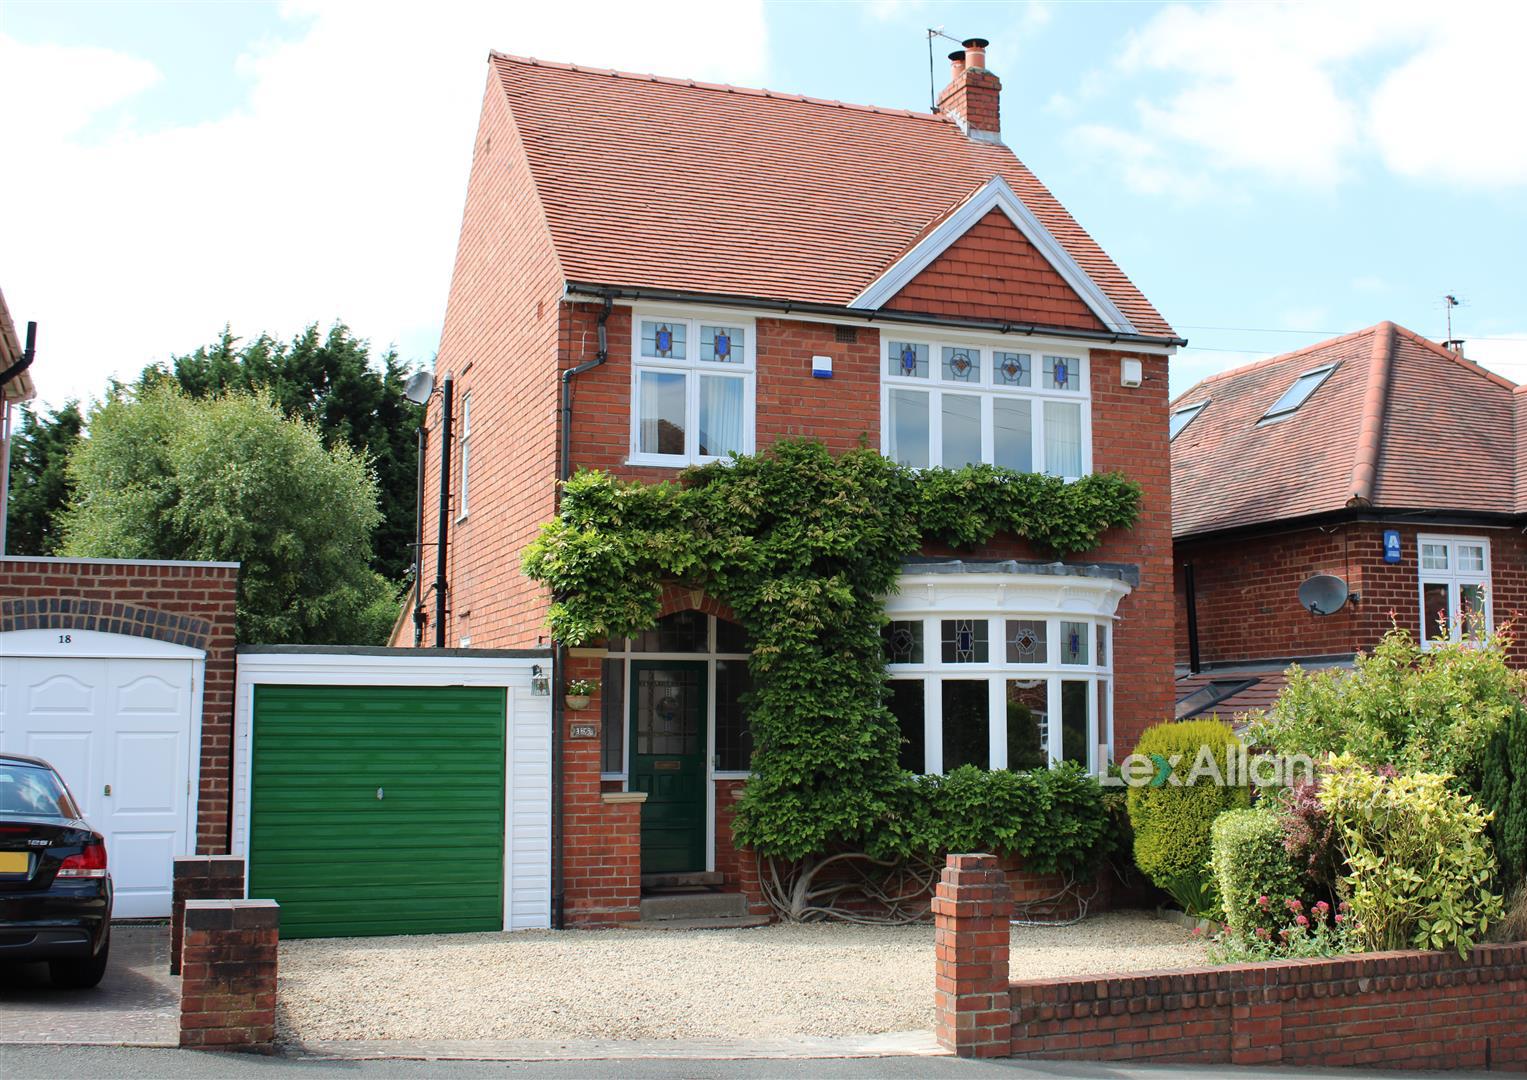 3 bed  for sale in Beckman Road, Stourbridge, DY9 